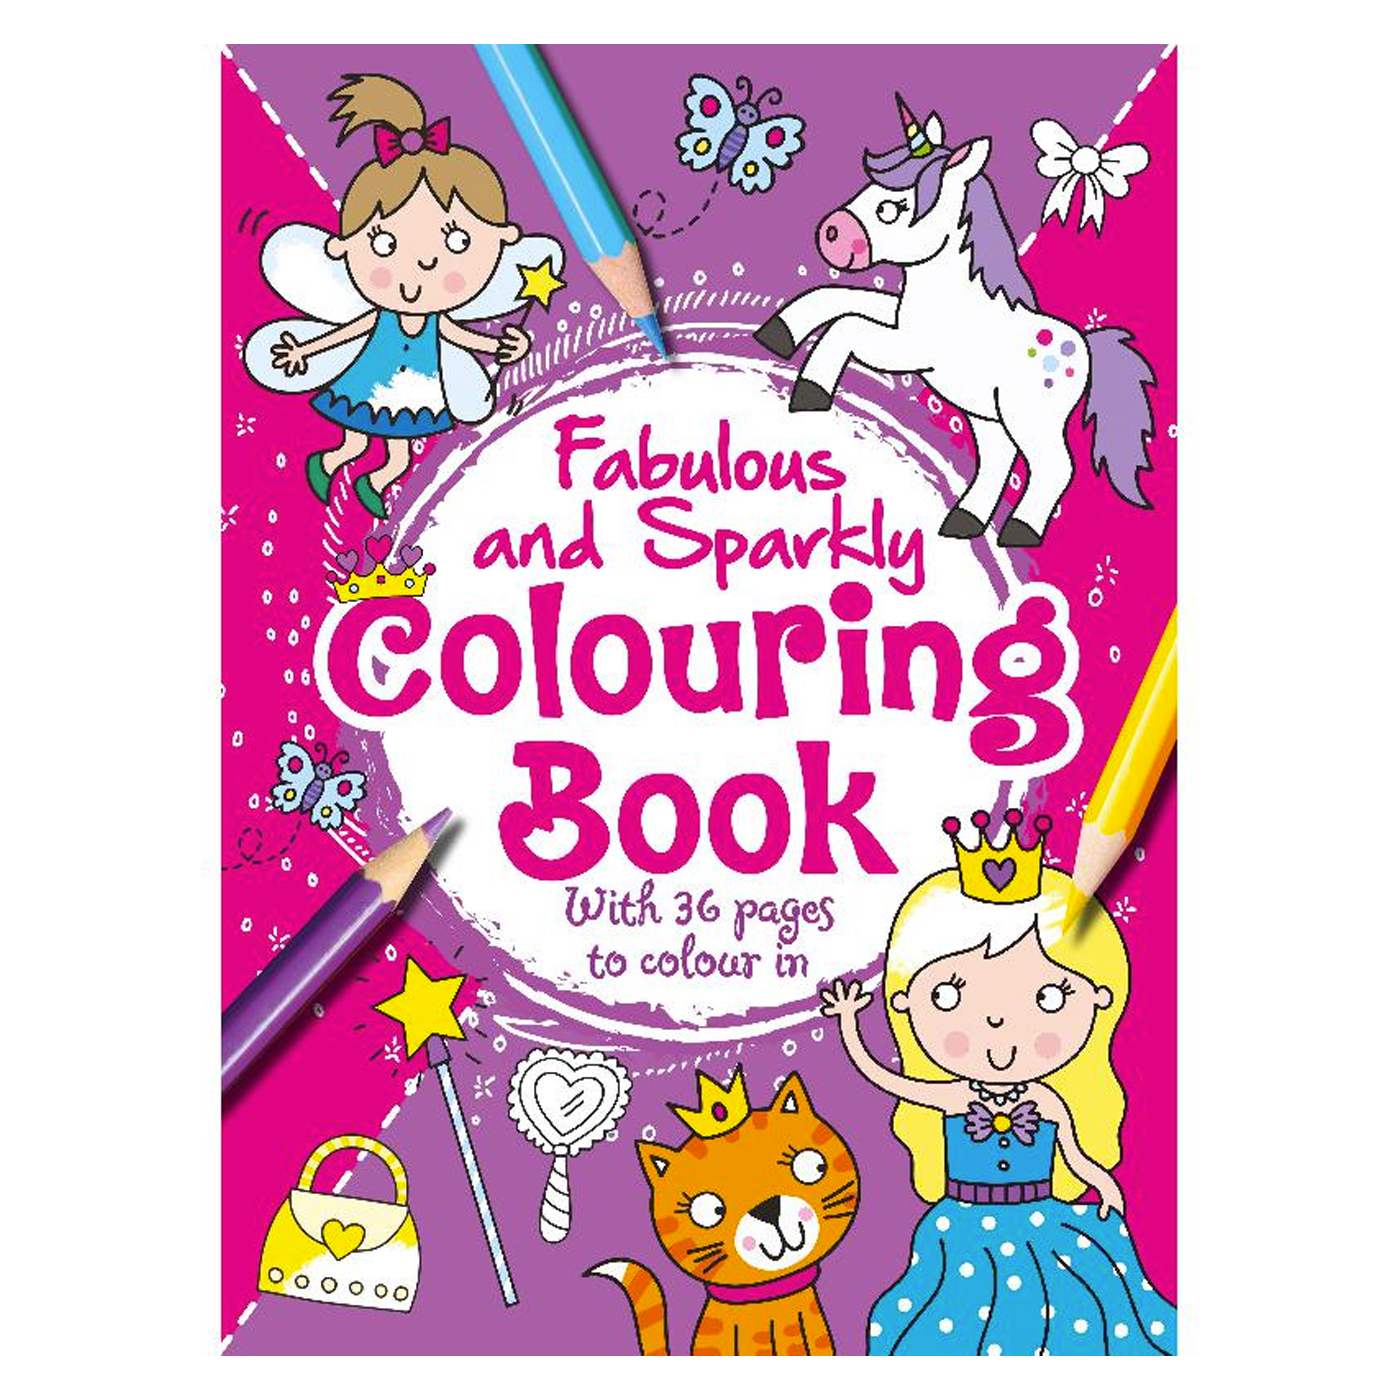  Fabulous and Sparkly Colouring Book